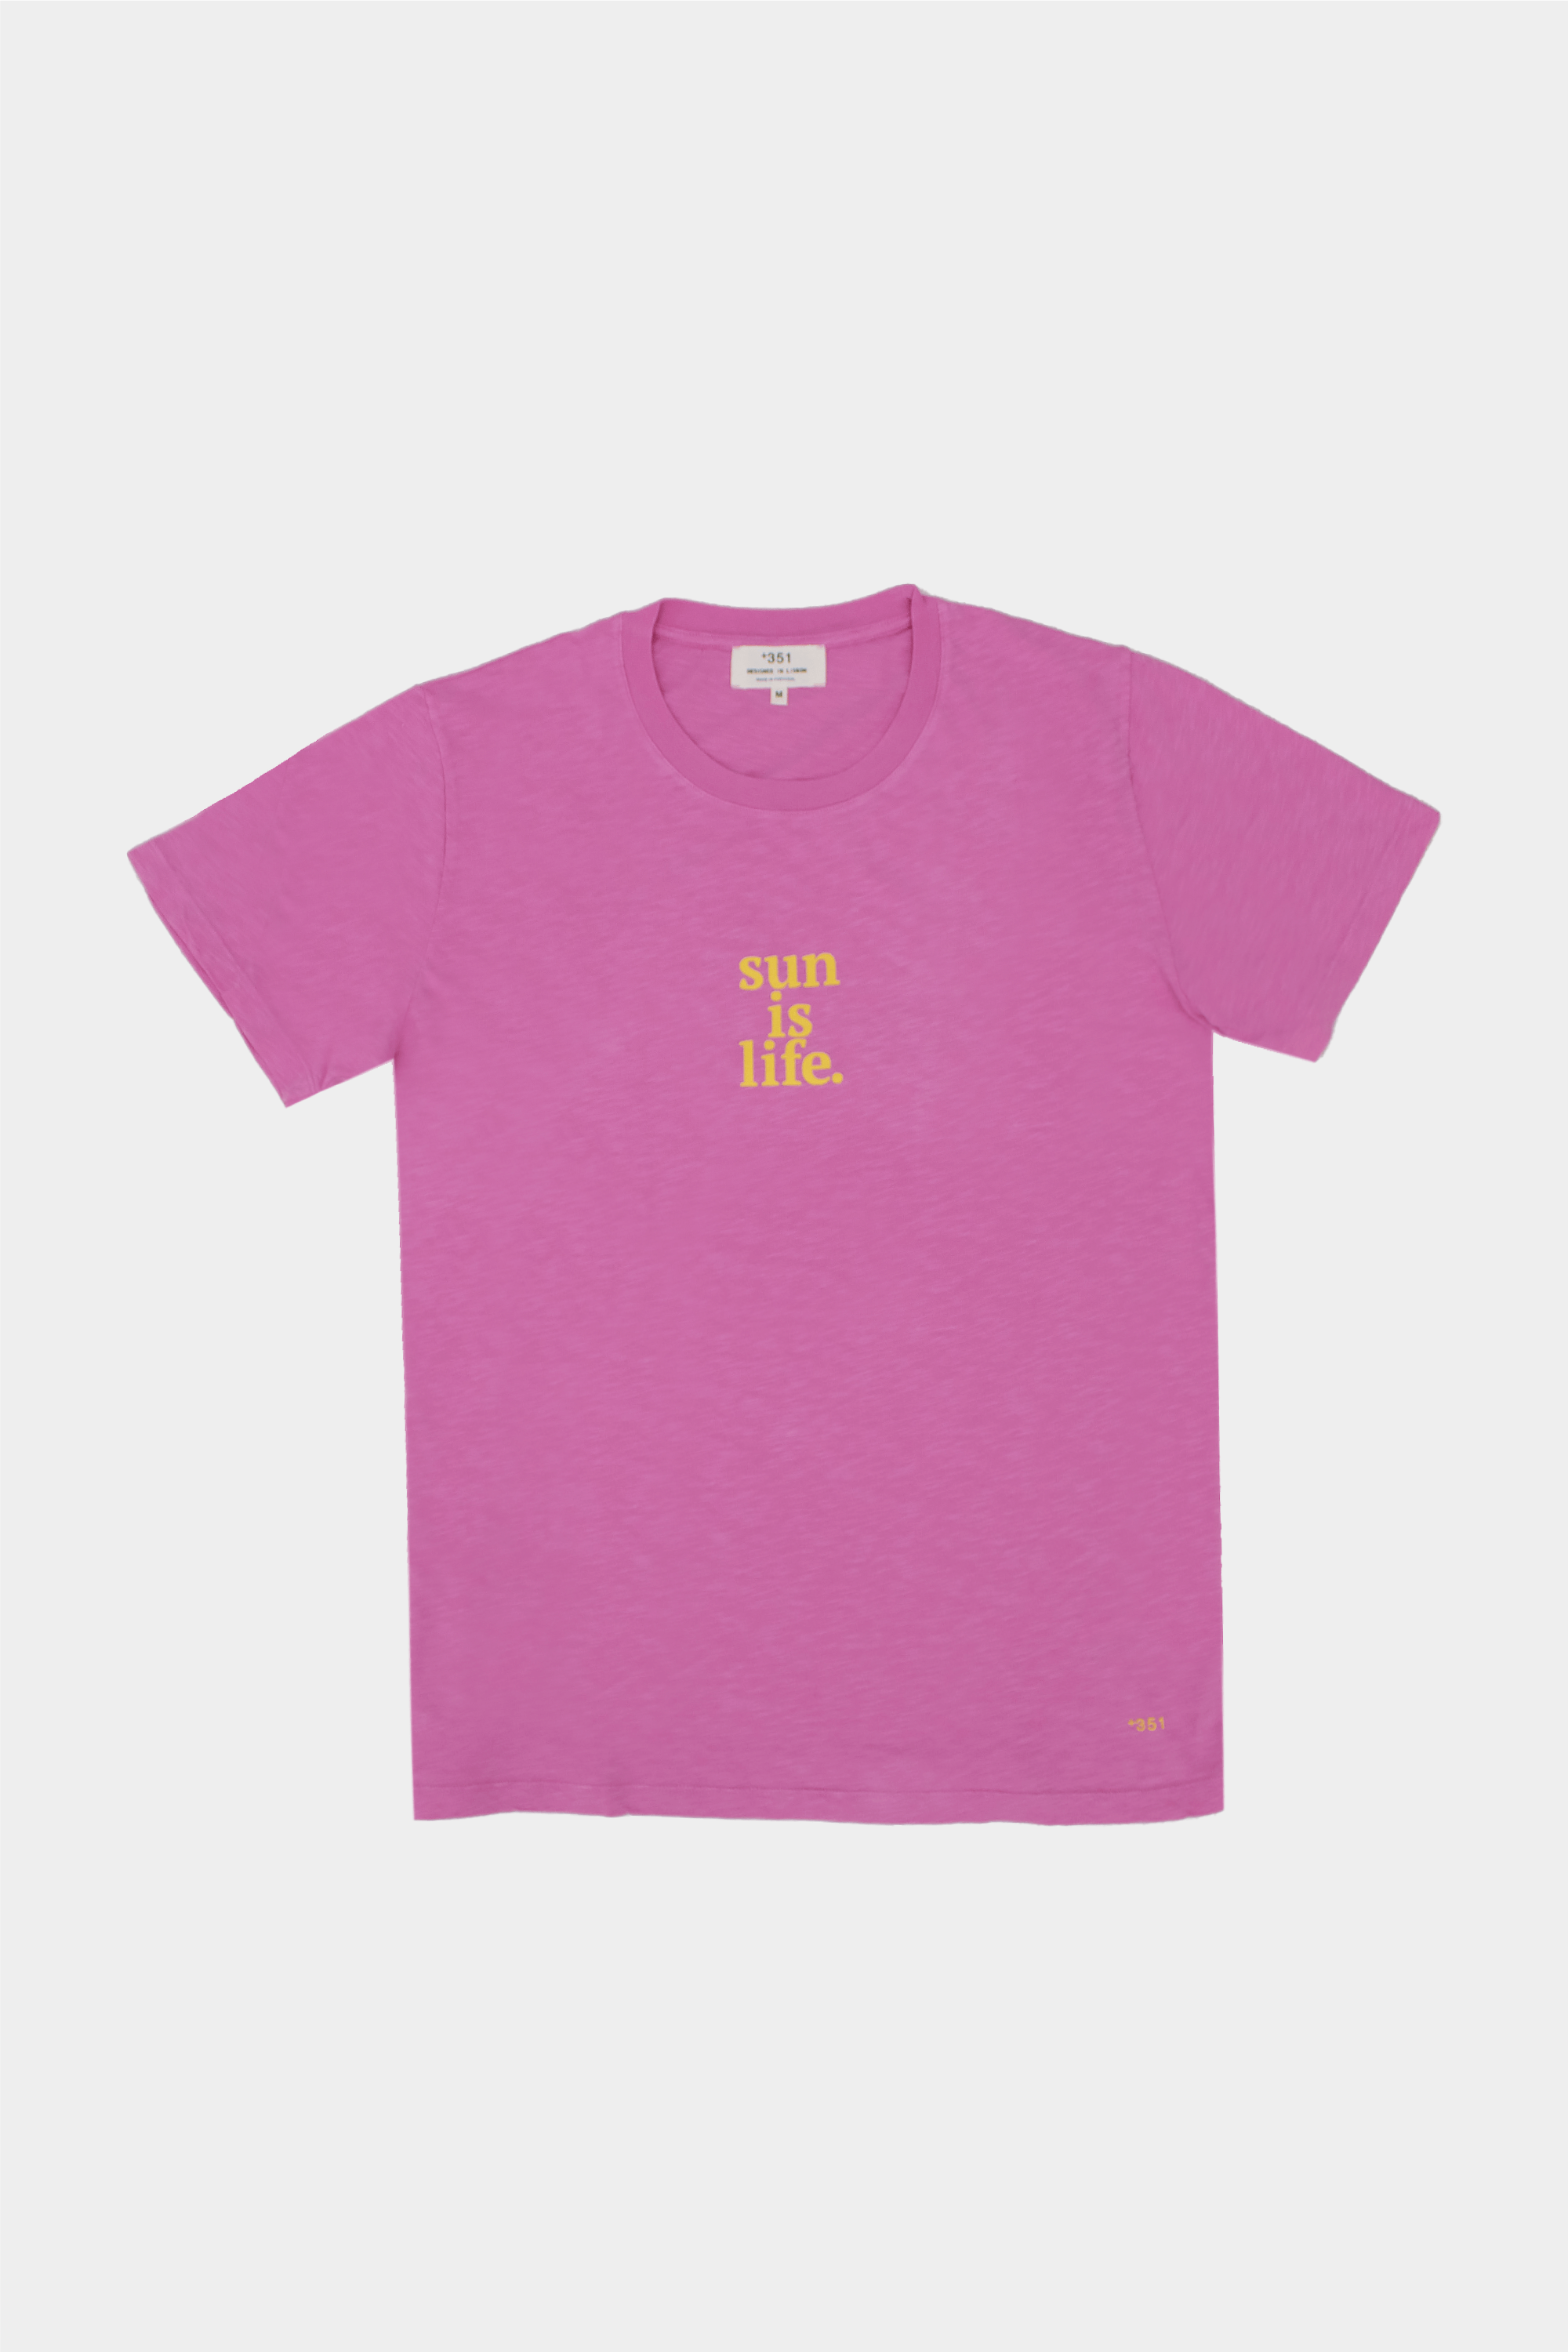 T-SHIRT GRAPHIC SUN IS LIFE STRAWBERRY & PALE YELLOW